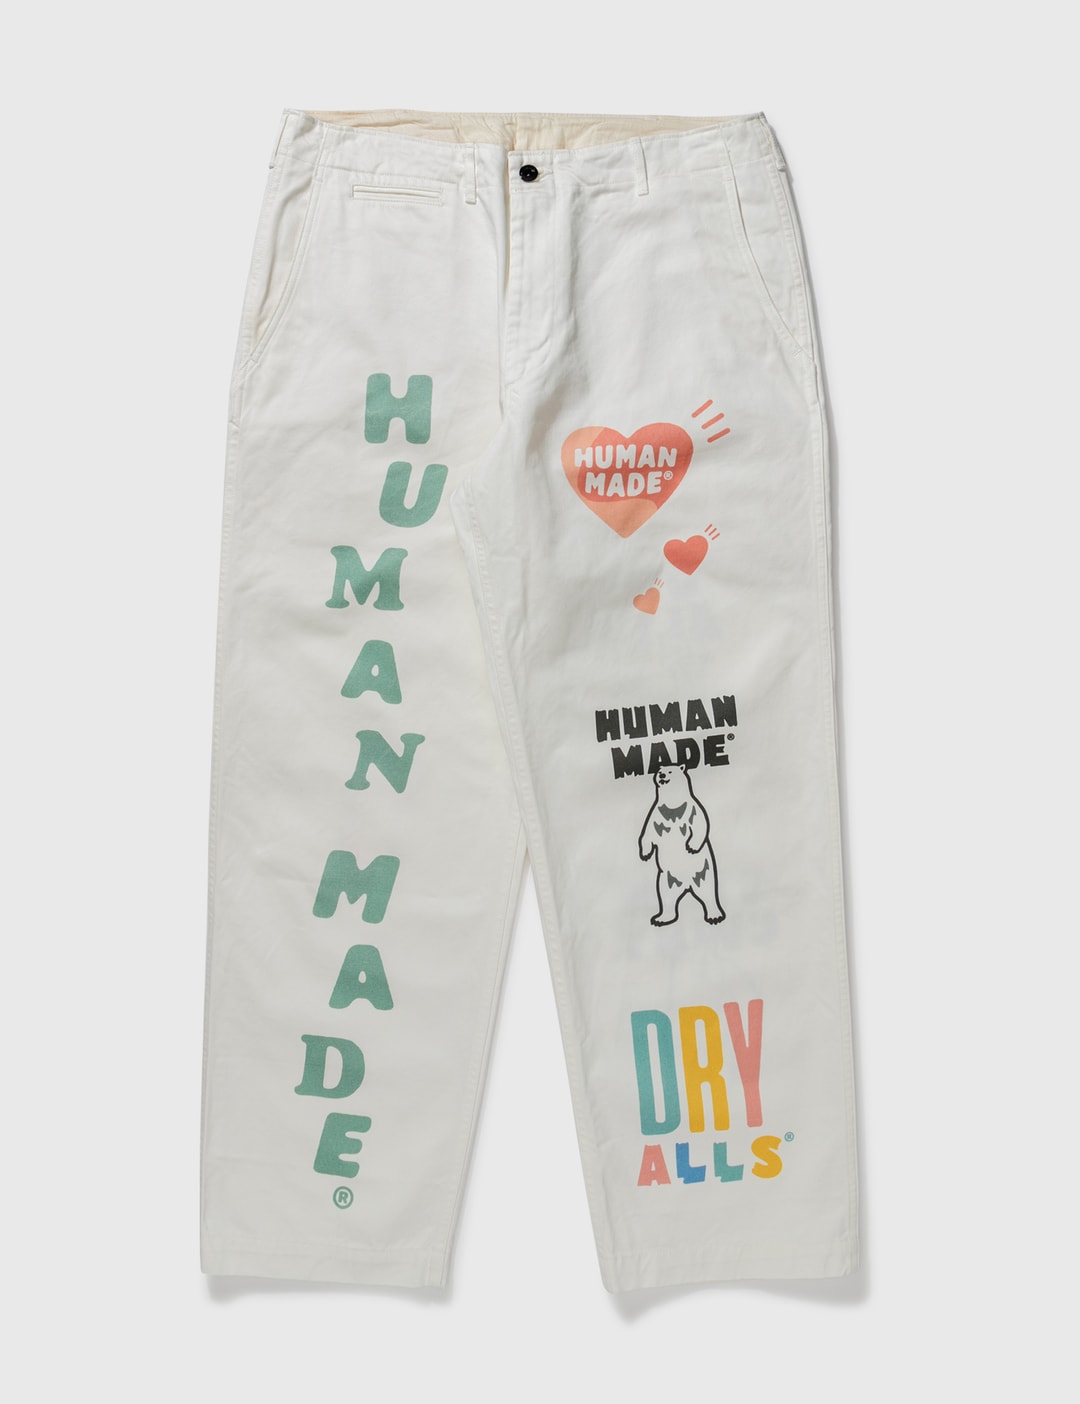 Human Made - Human Made Dry Alls Pants | HBX - Globally Curated Fashion ...